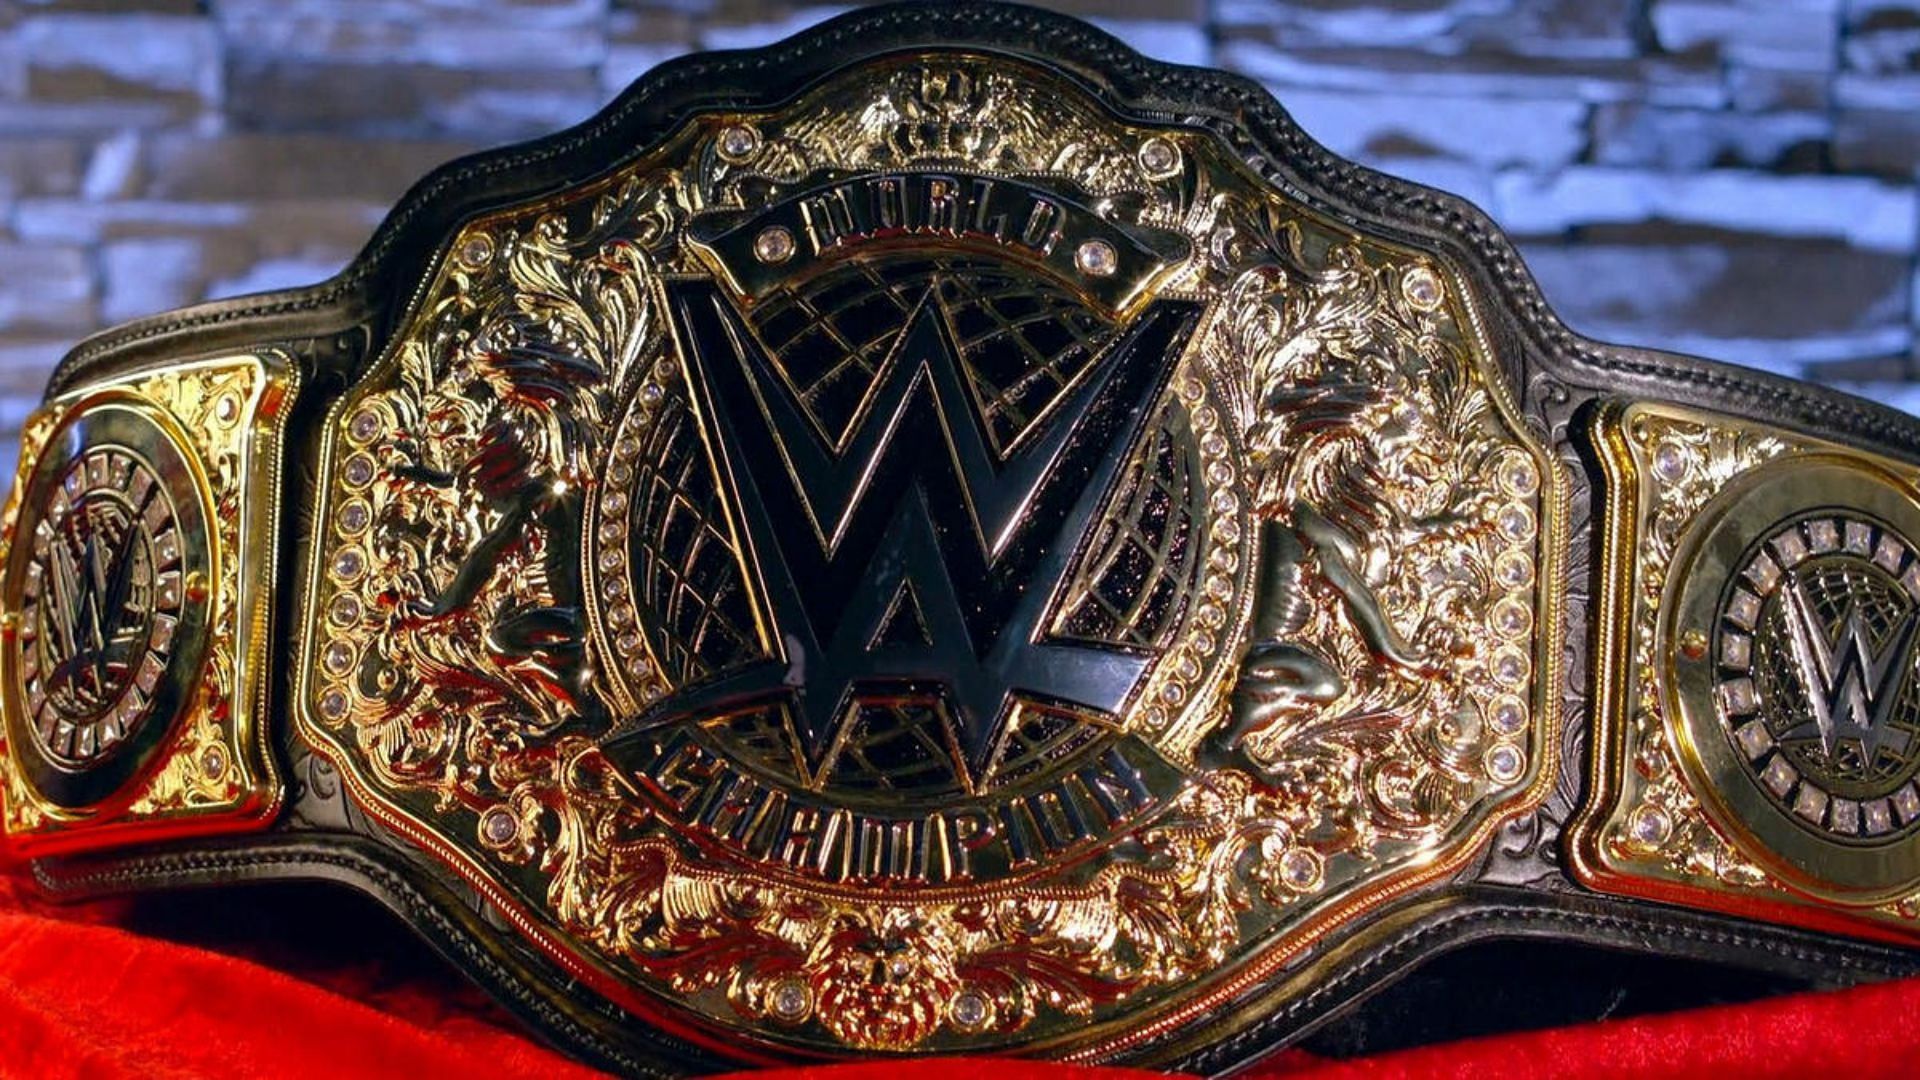 The WWE World Heavyweight Champion is one of the top prizes of the promotion